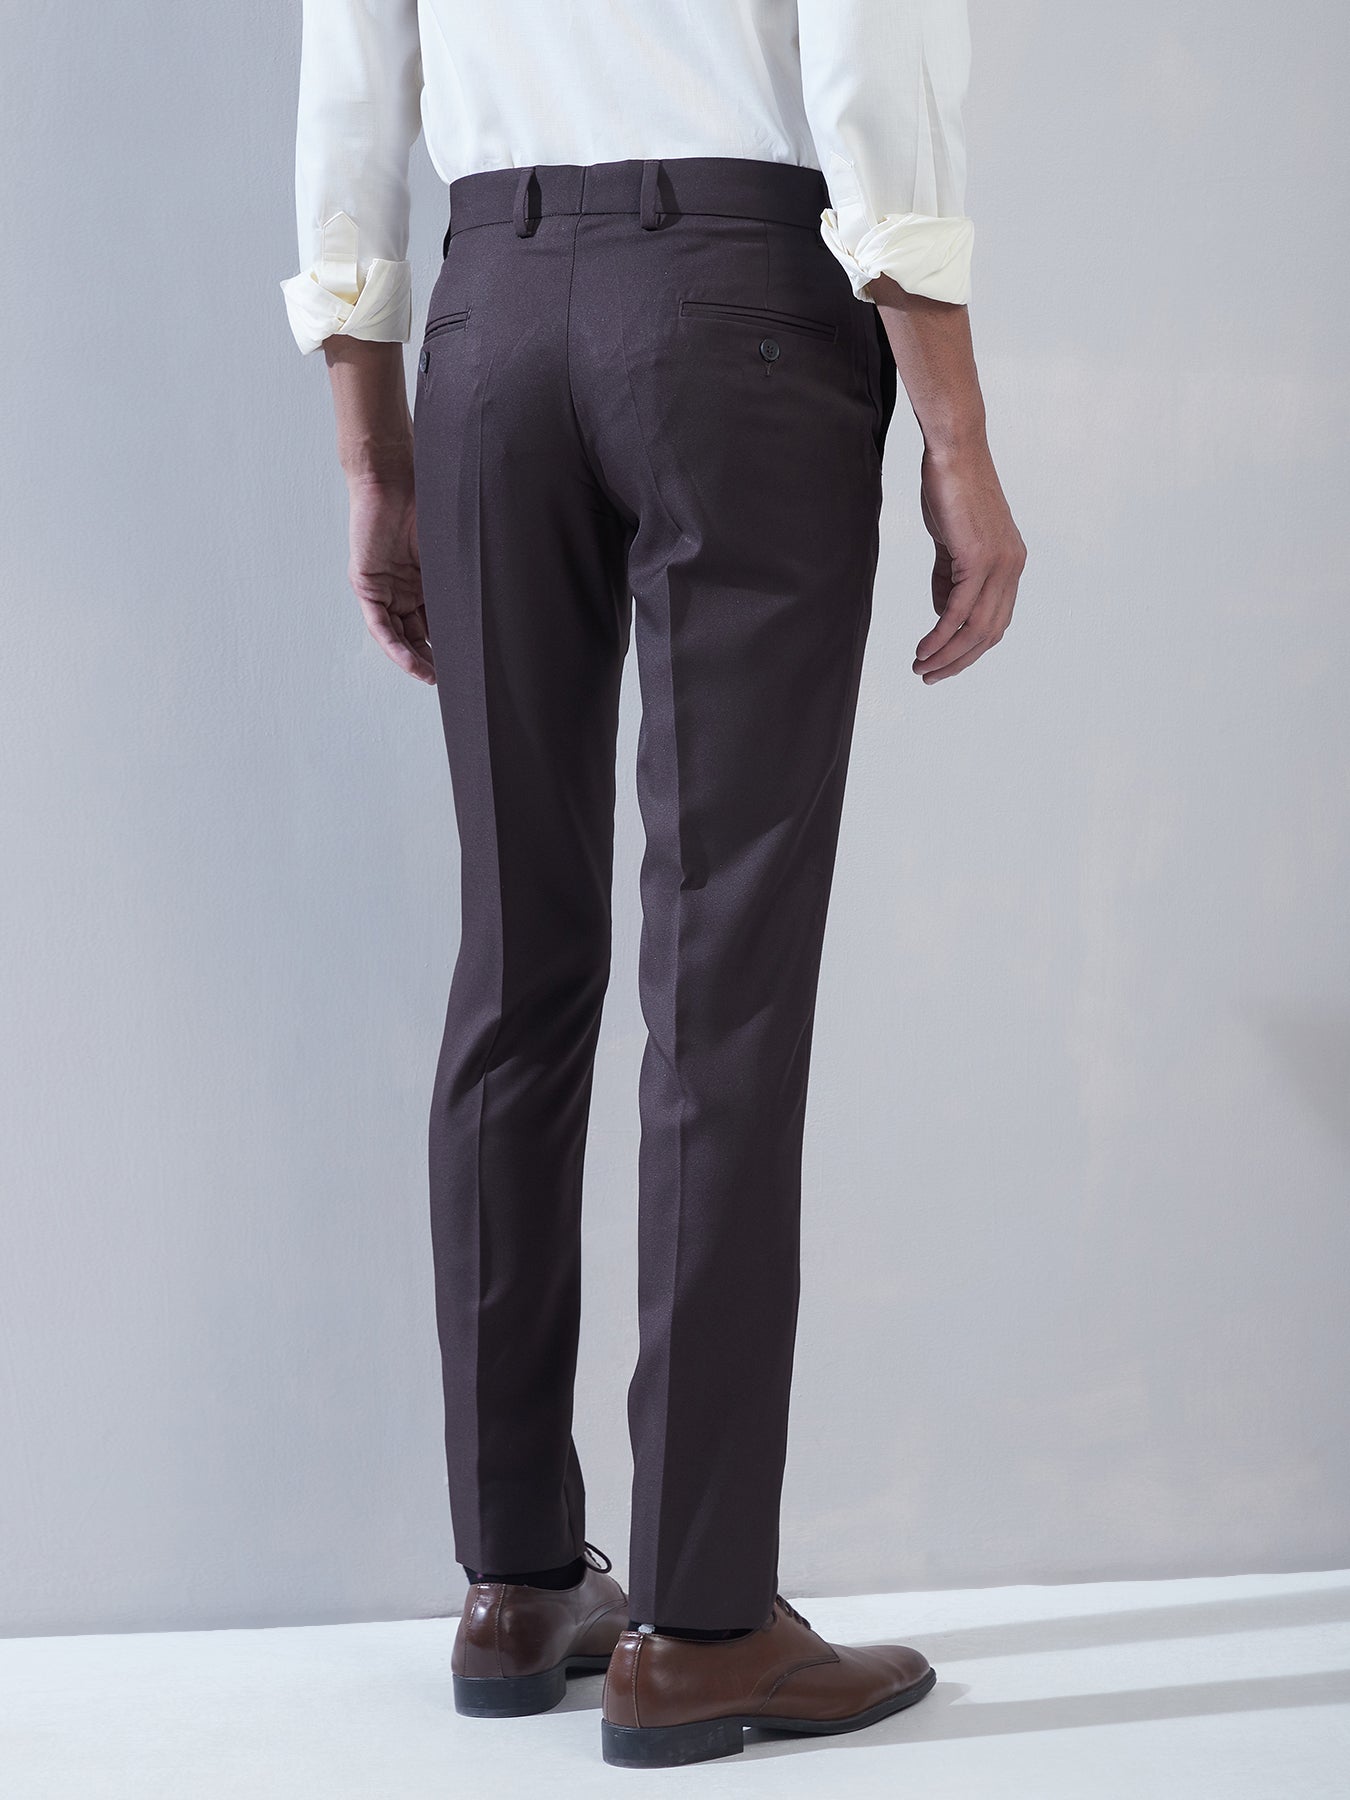 Poly Viscose Charcoal Plain Slim Fit Flat Front Formal Trouser